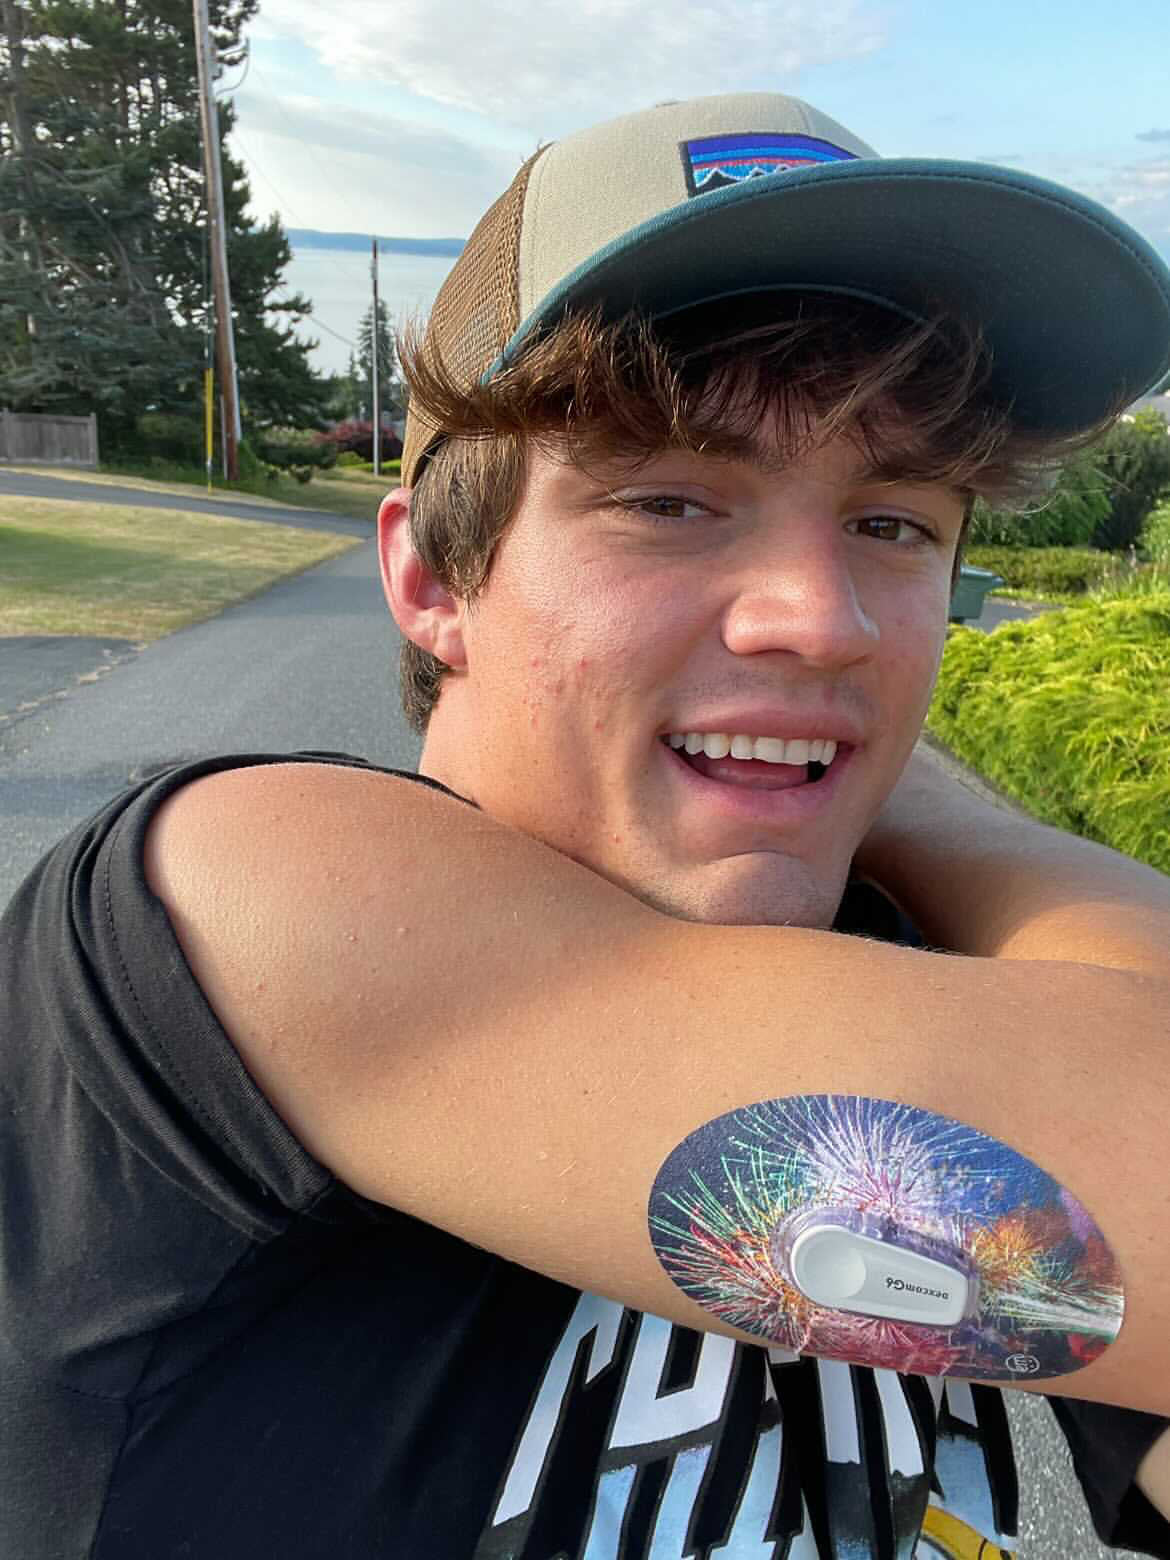 ExpressionMed Teenage boy outside with Fireworks Dexcom G6 Tape on arm